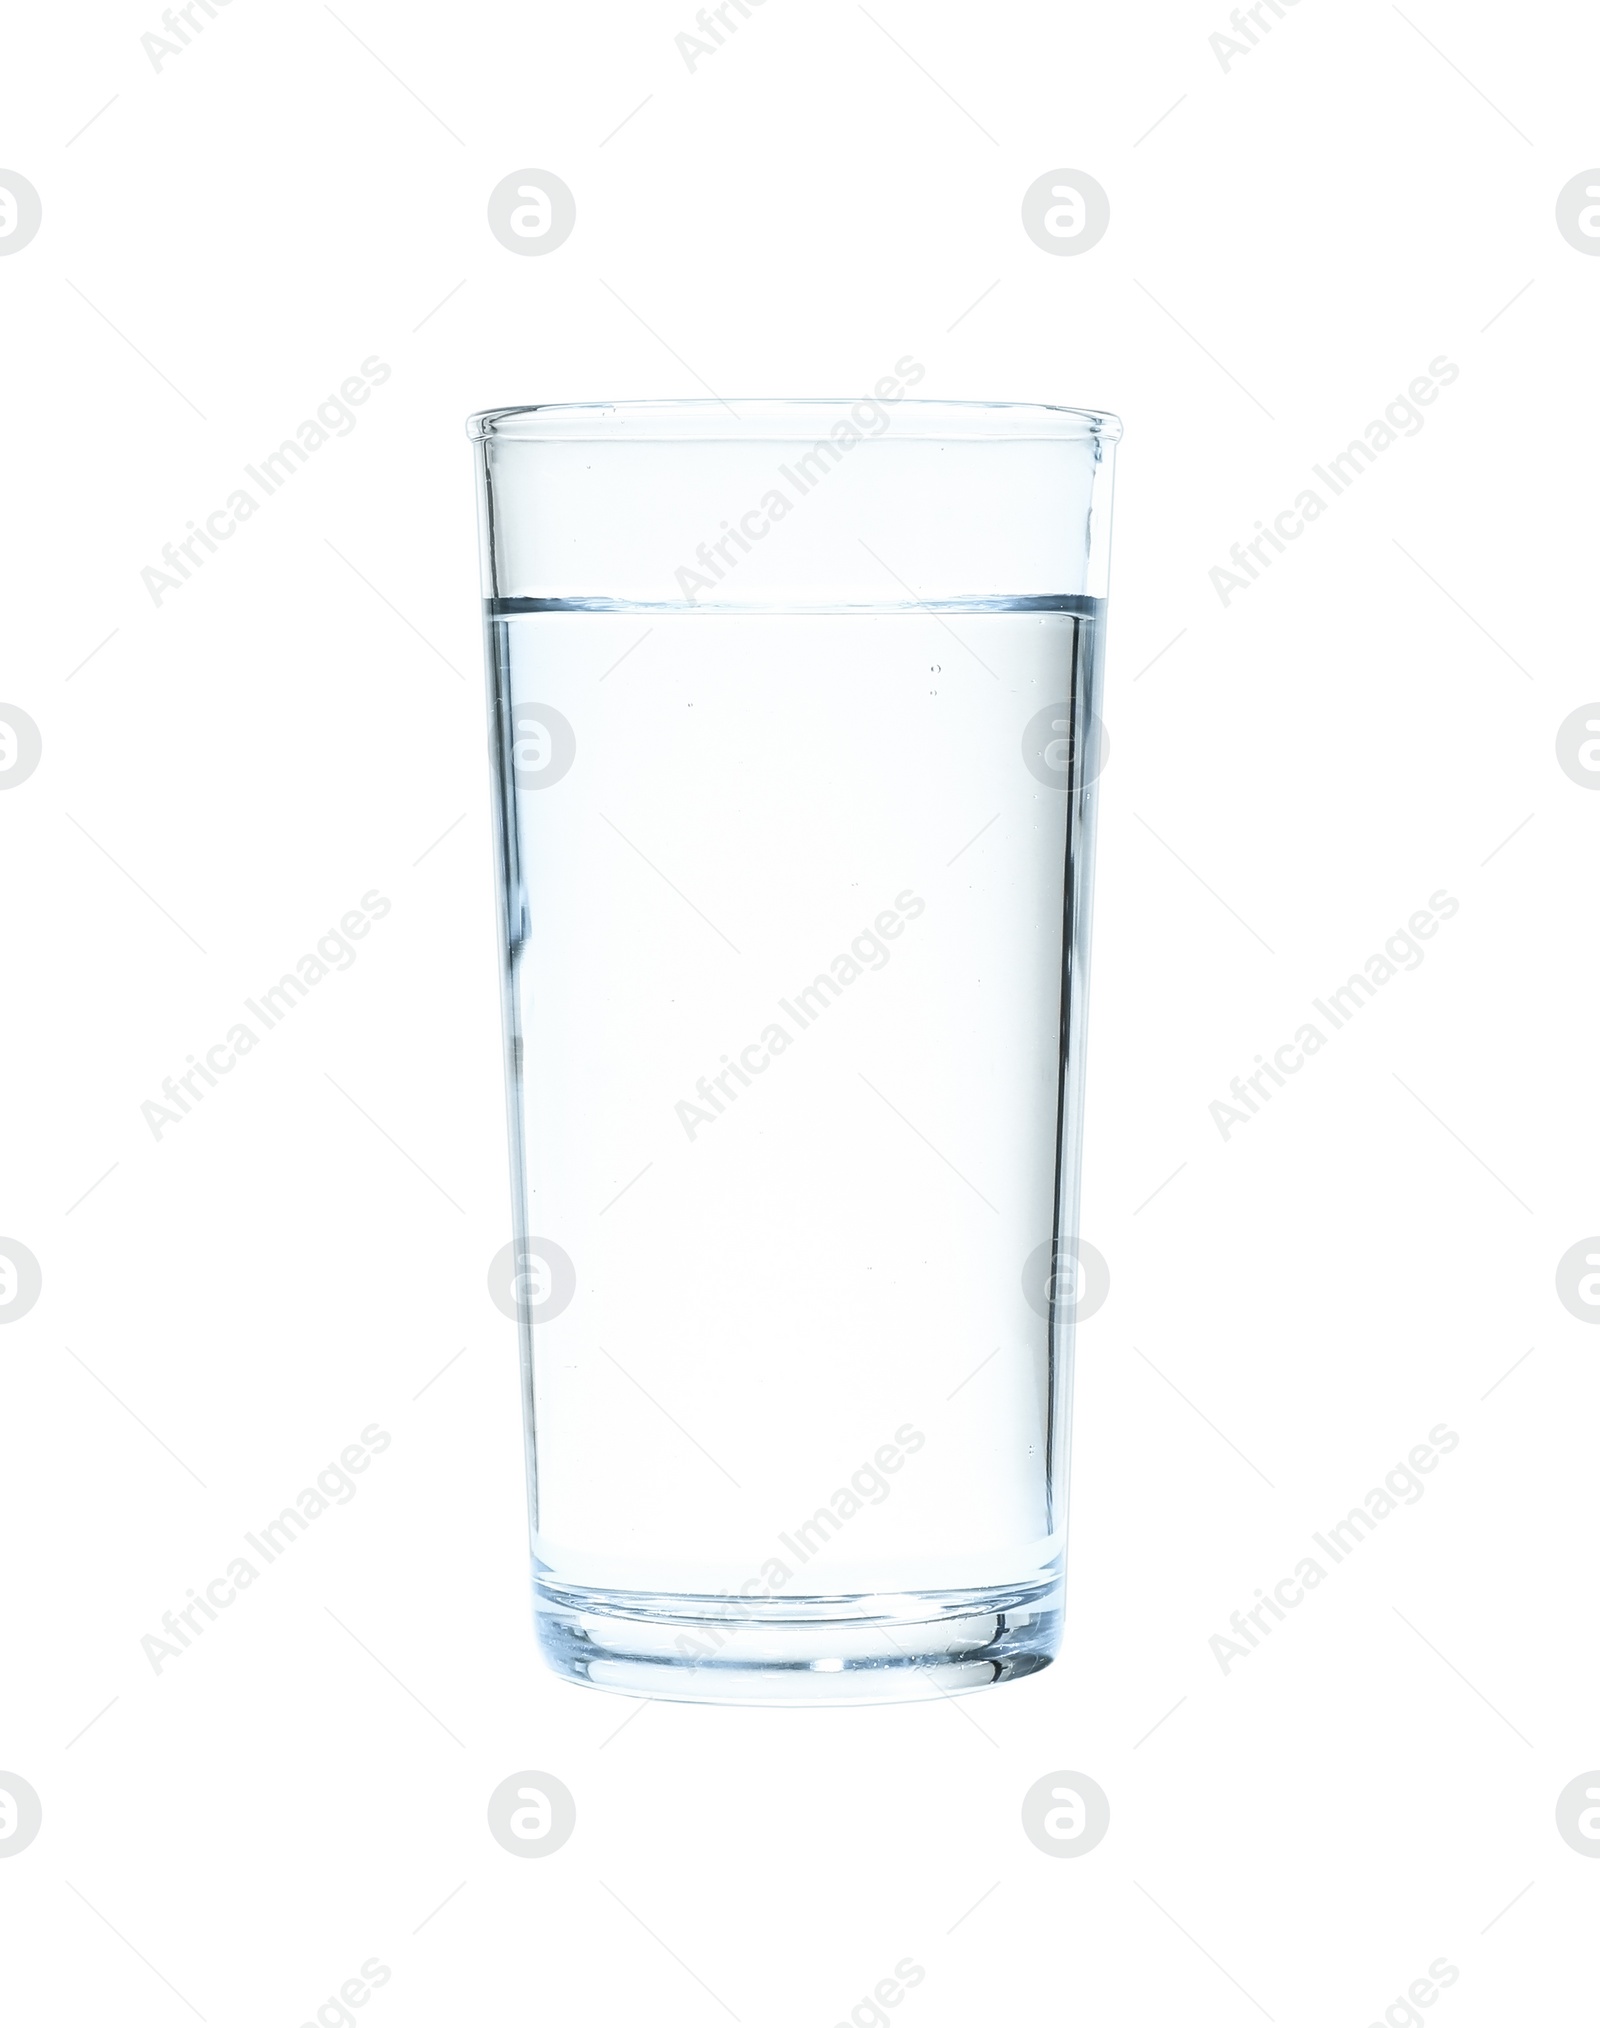 Photo of Glass of water on blue background. Refreshing drink